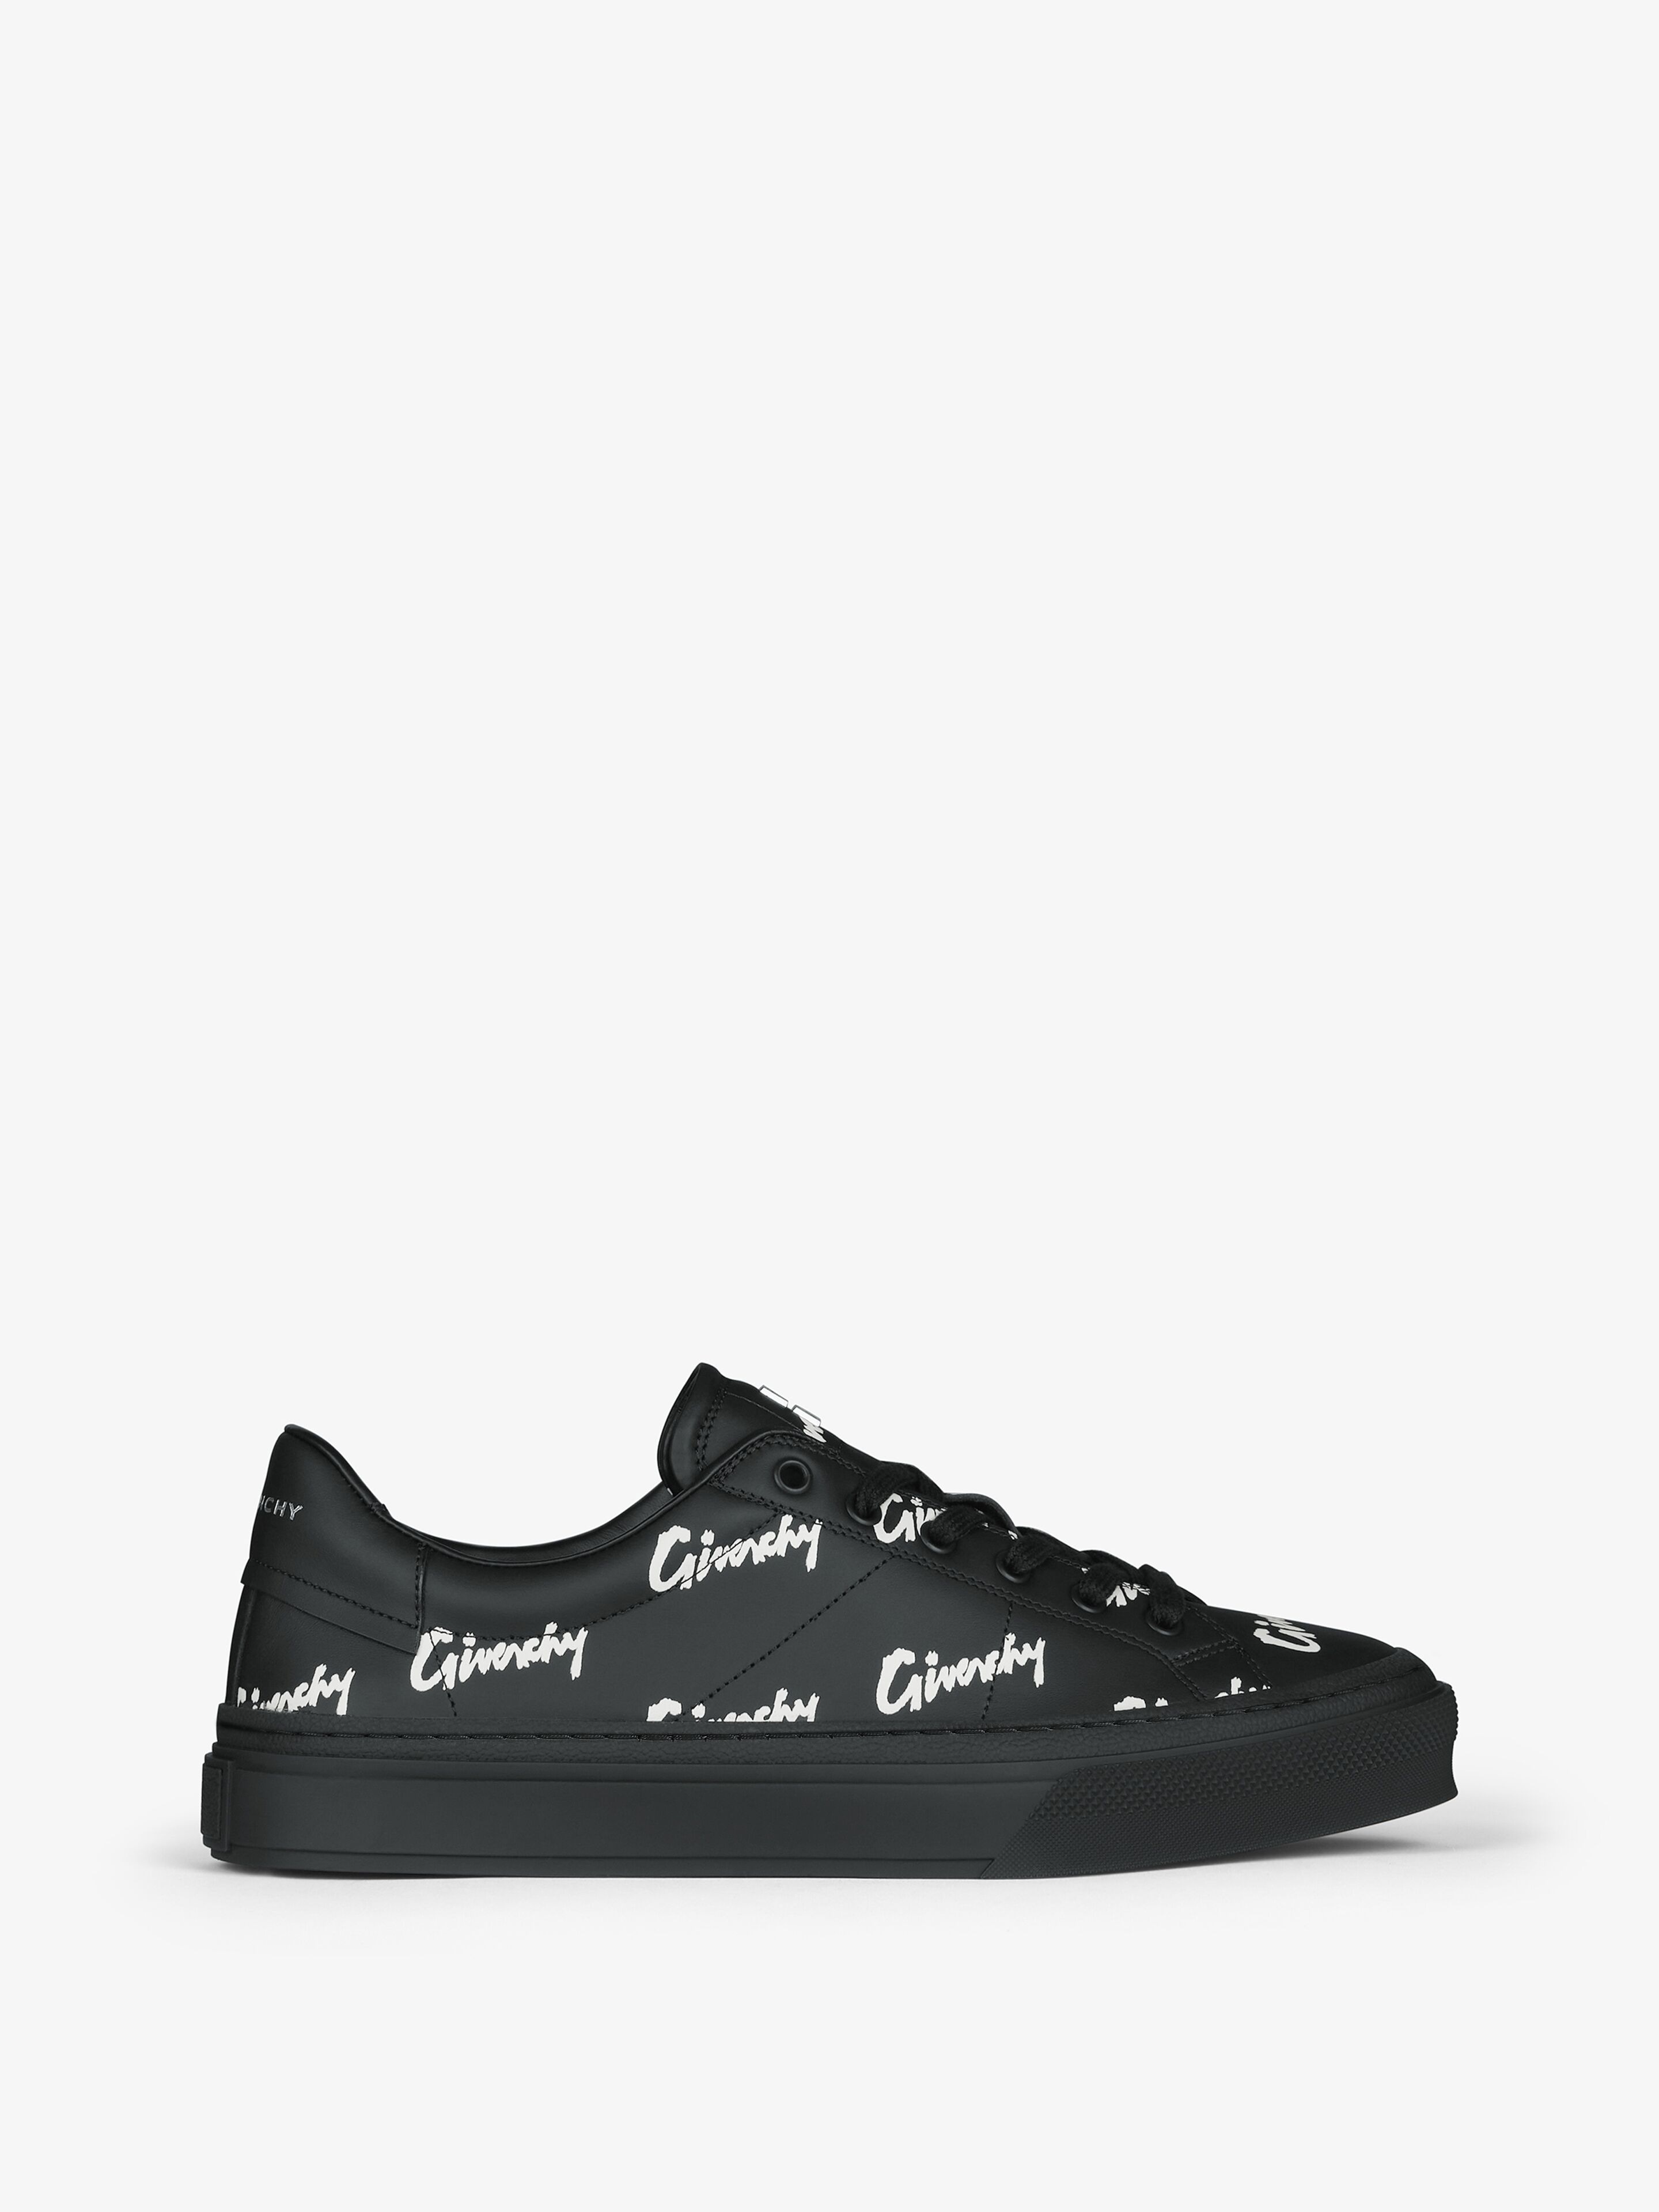 CITY SPORT SNEAKERS IN ALL-OVER GIVENCHY PRINTED LEATHER - 1